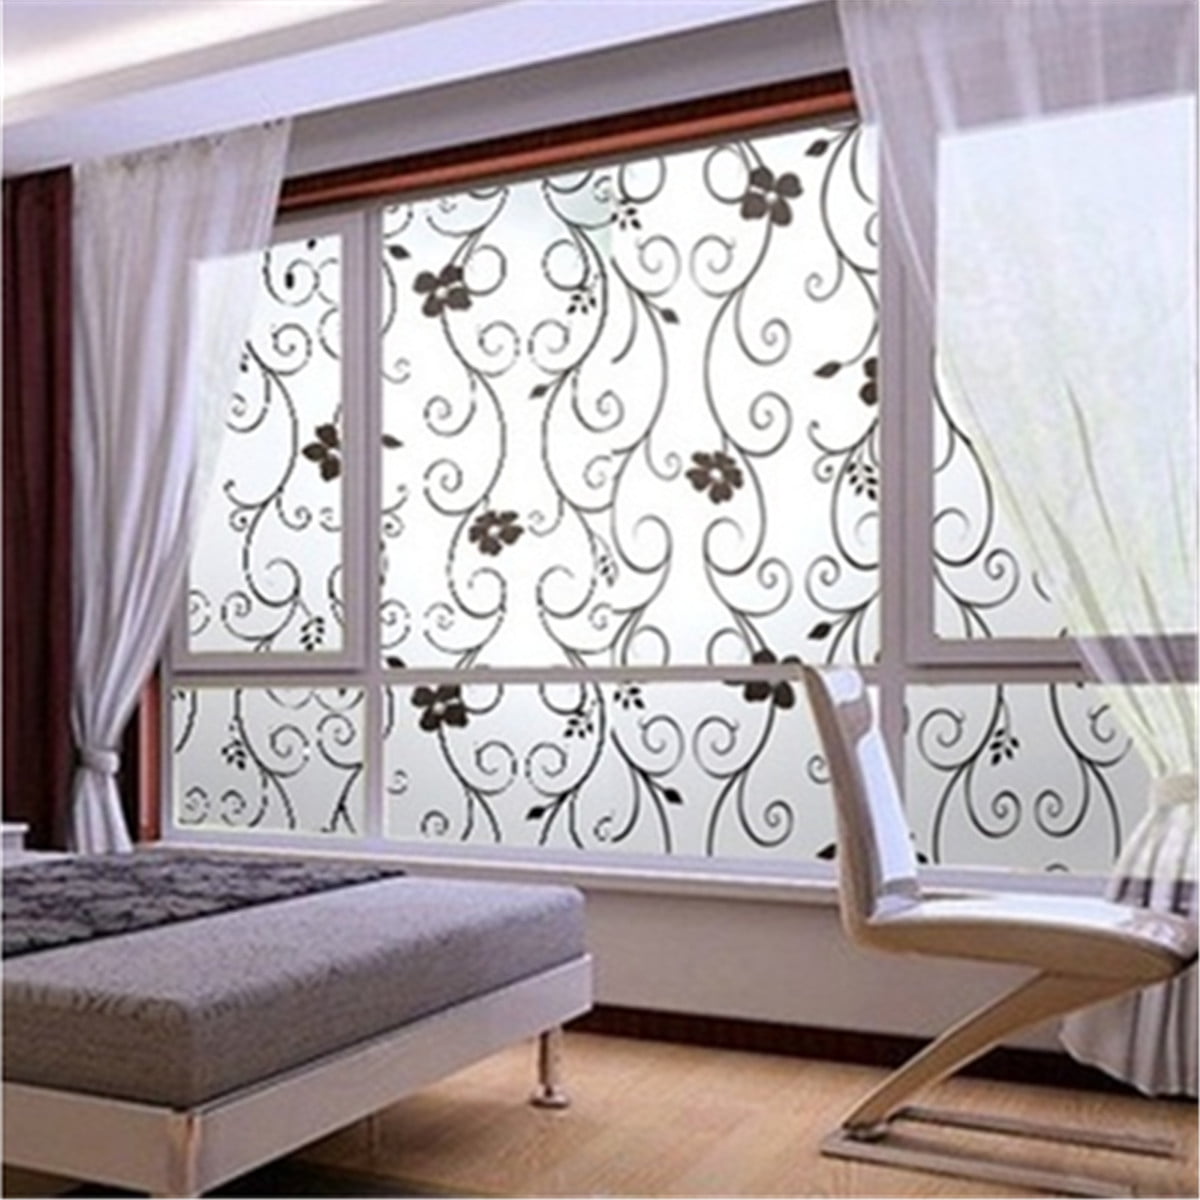 45x200cm 3D Privacy Window Glass Film Decor Home Bedroom Decal Self Adhesive NEW